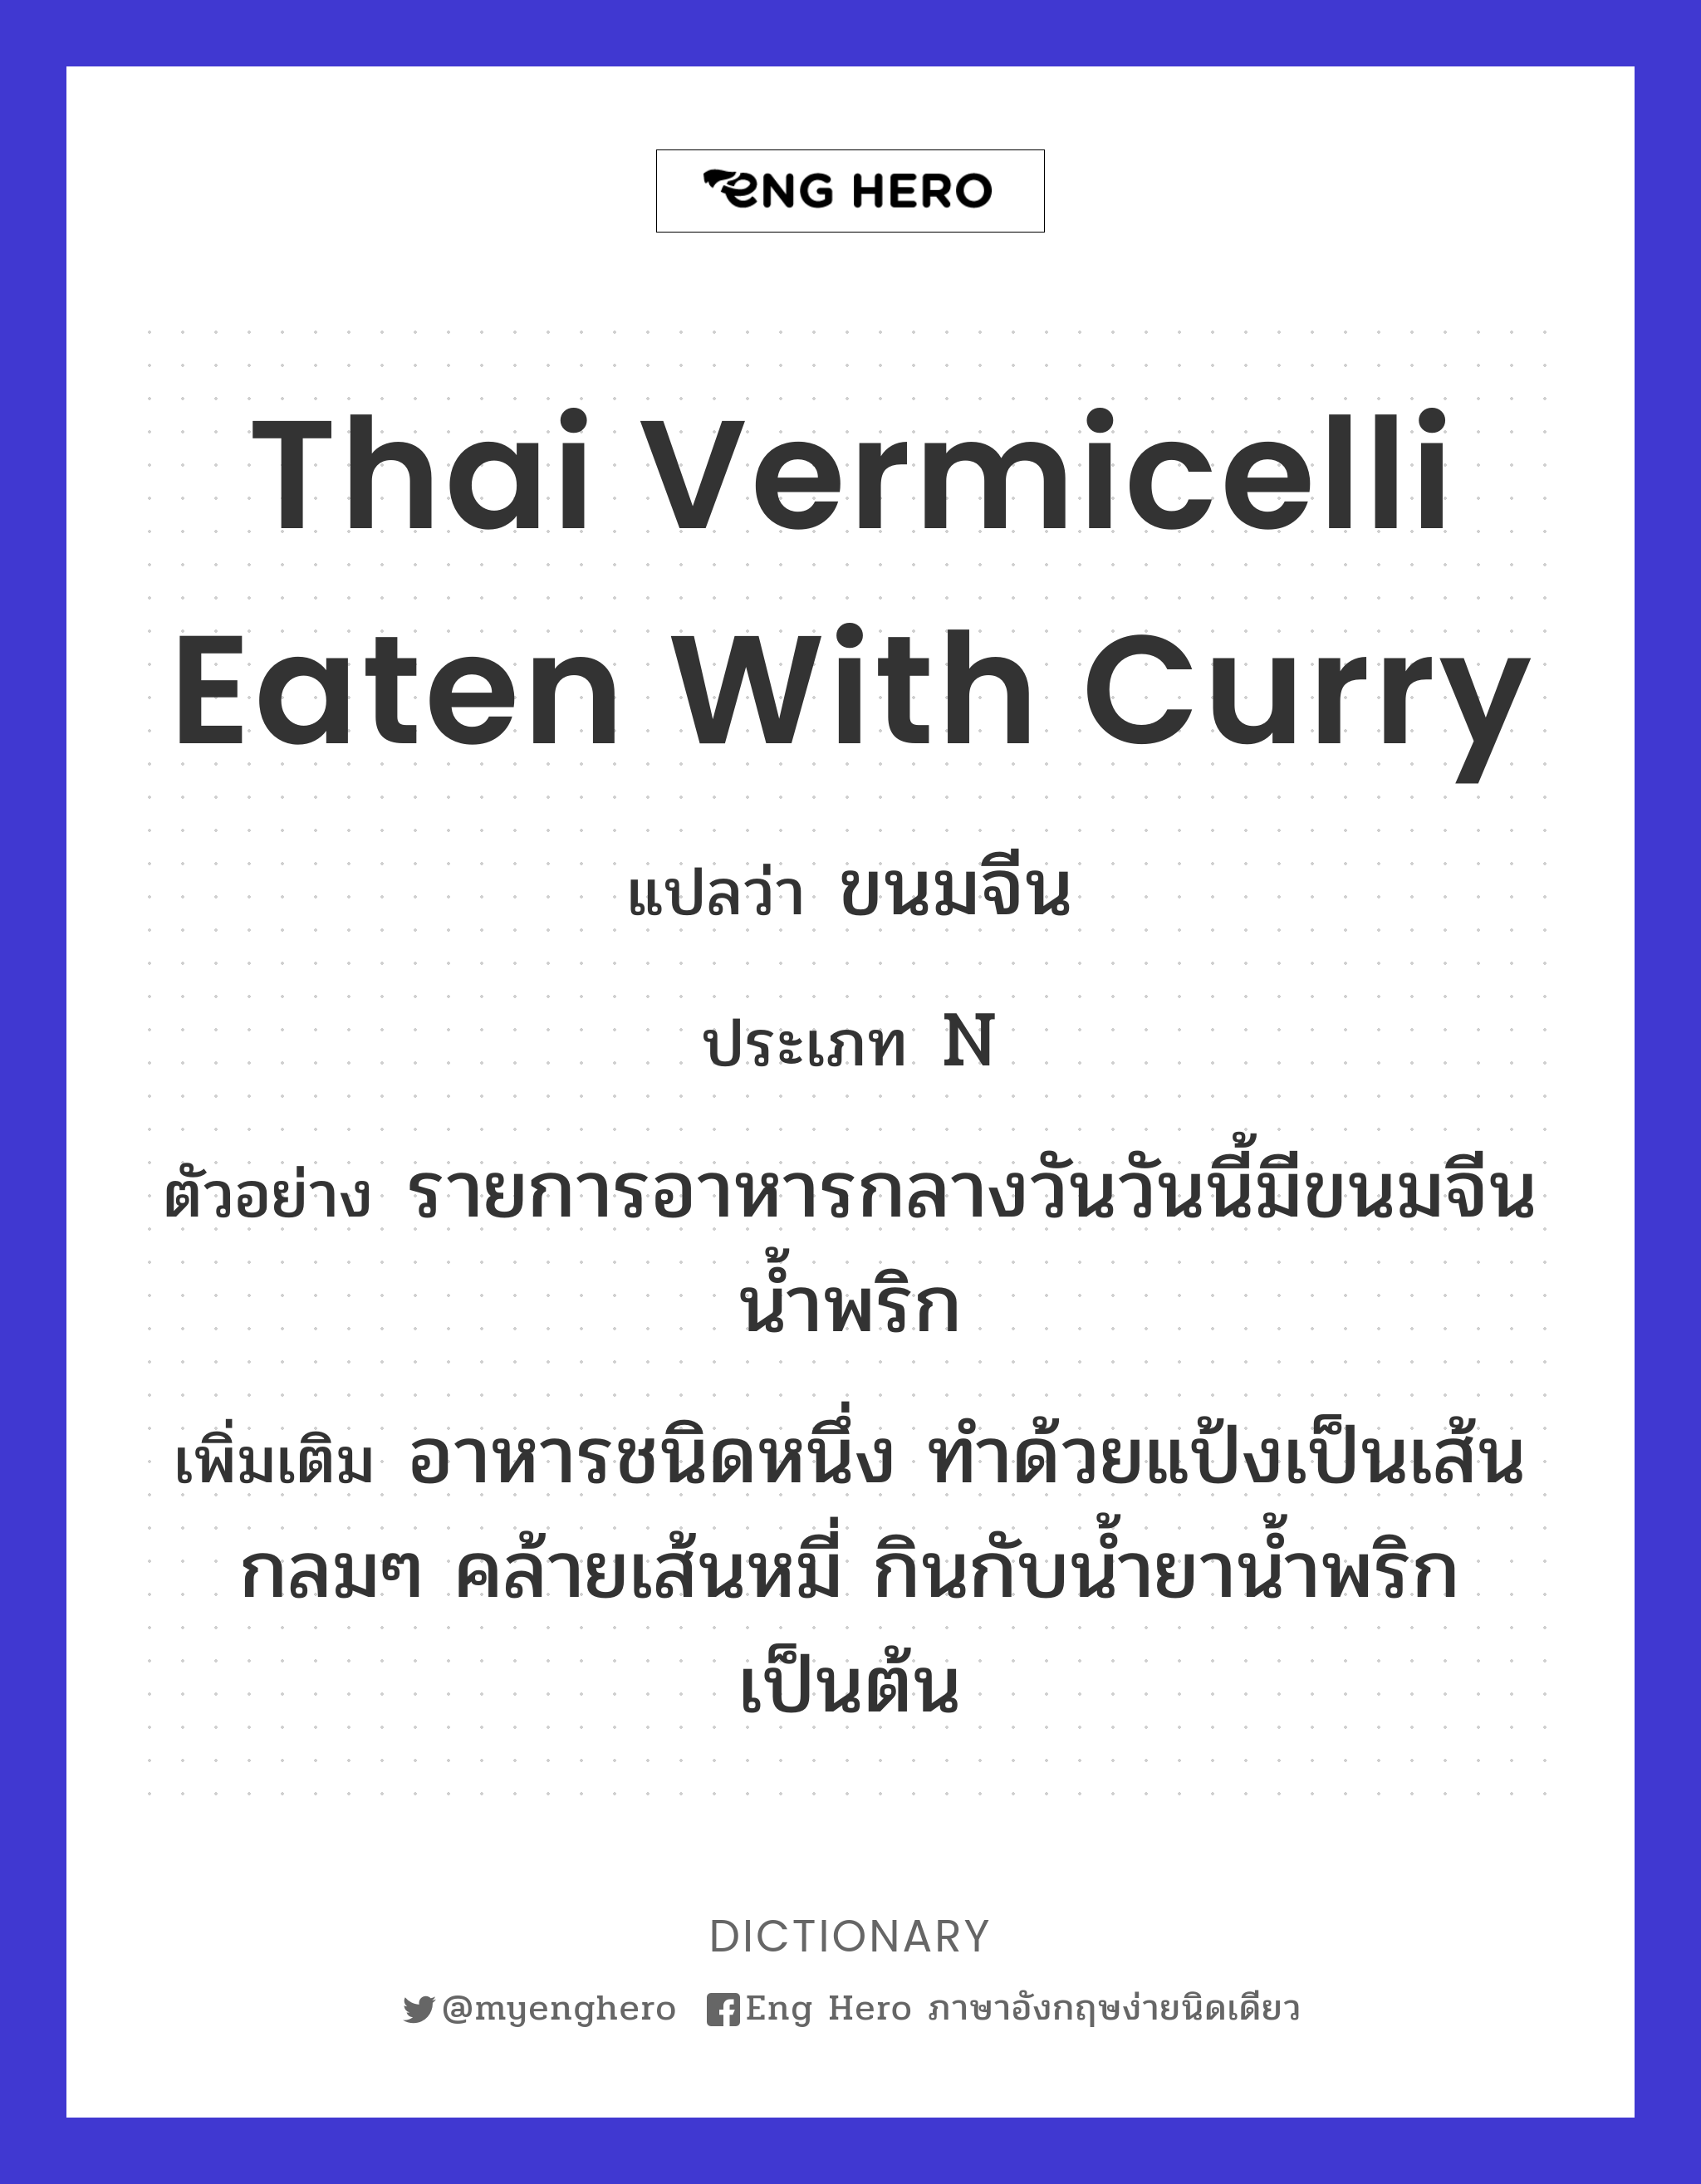 Thai vermicelli eaten with curry